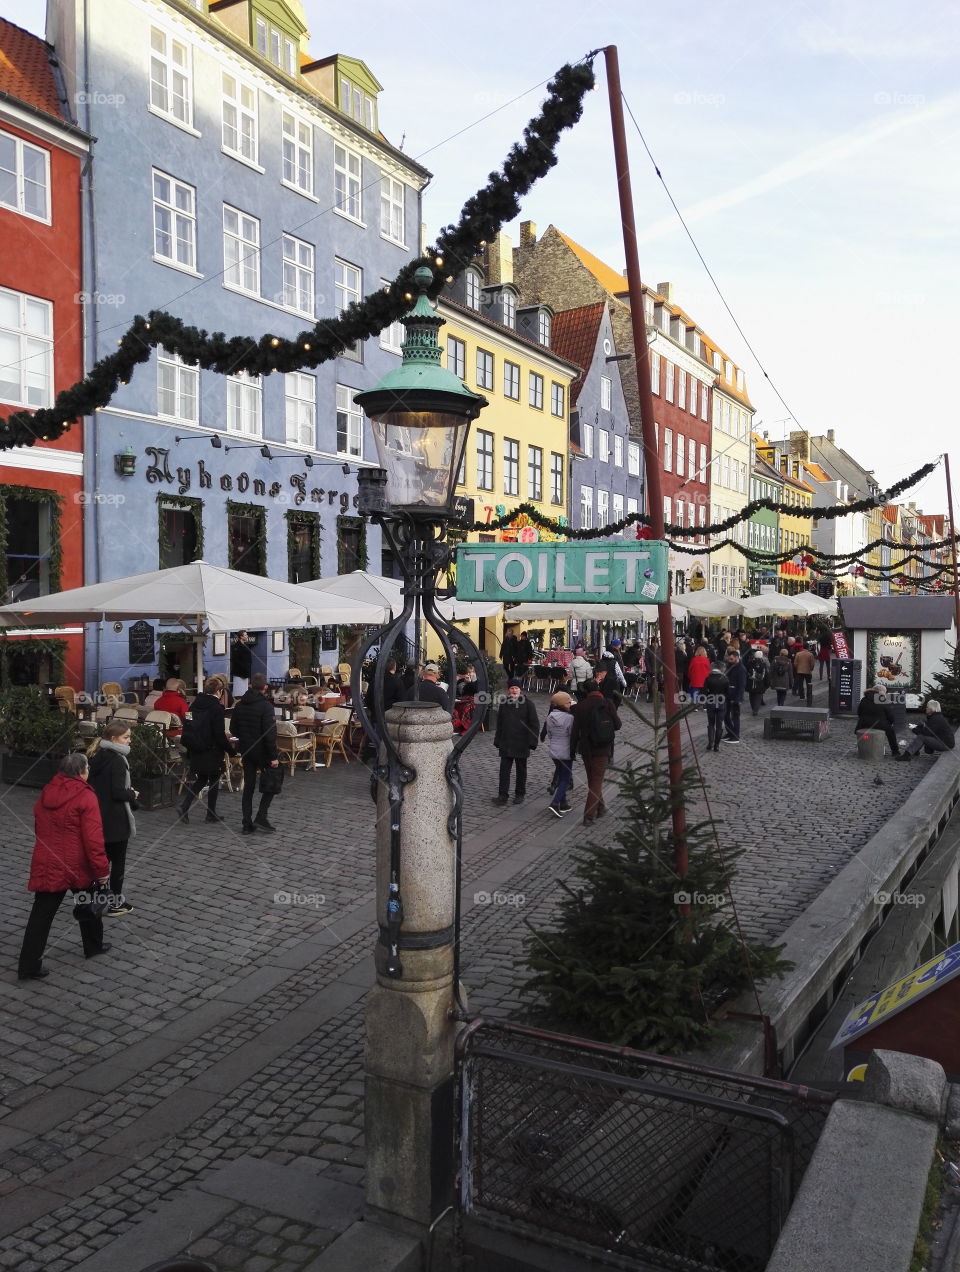 Nyhavn, Copenhagen is a perfect spot for you who want Christmas feeling and drink beer in the summer